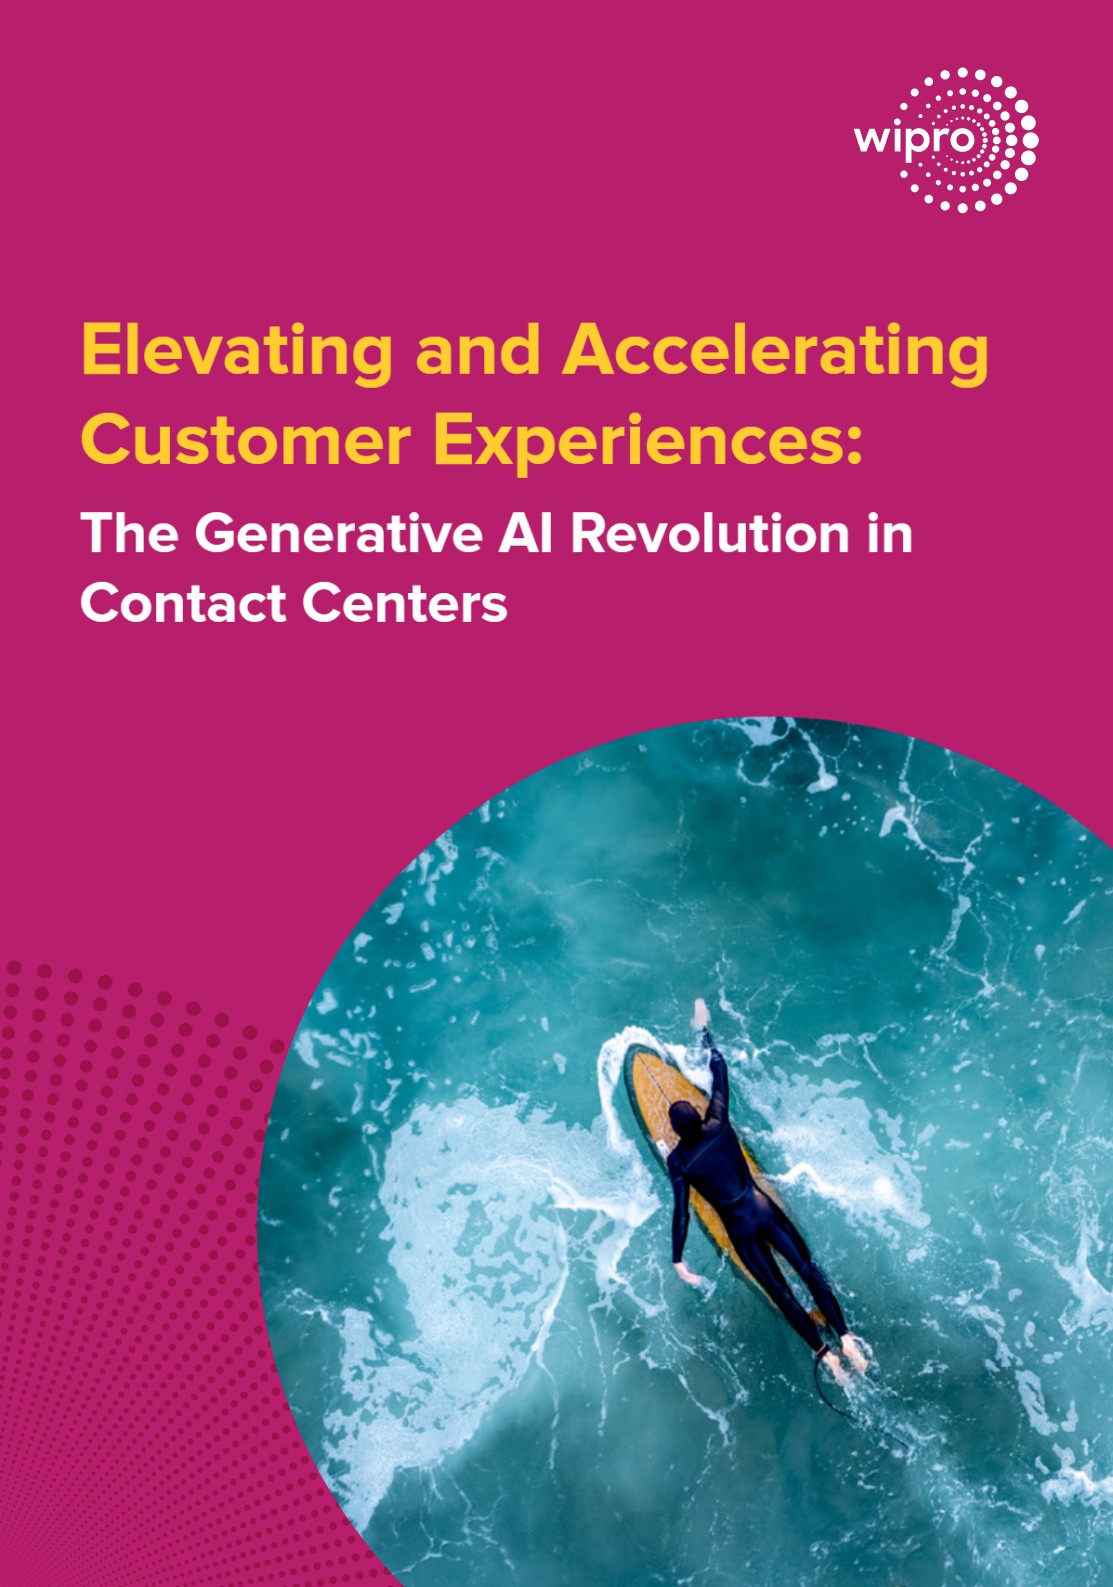 Discover the Transformative Journey of Contact Centers in the Era of Generative AI